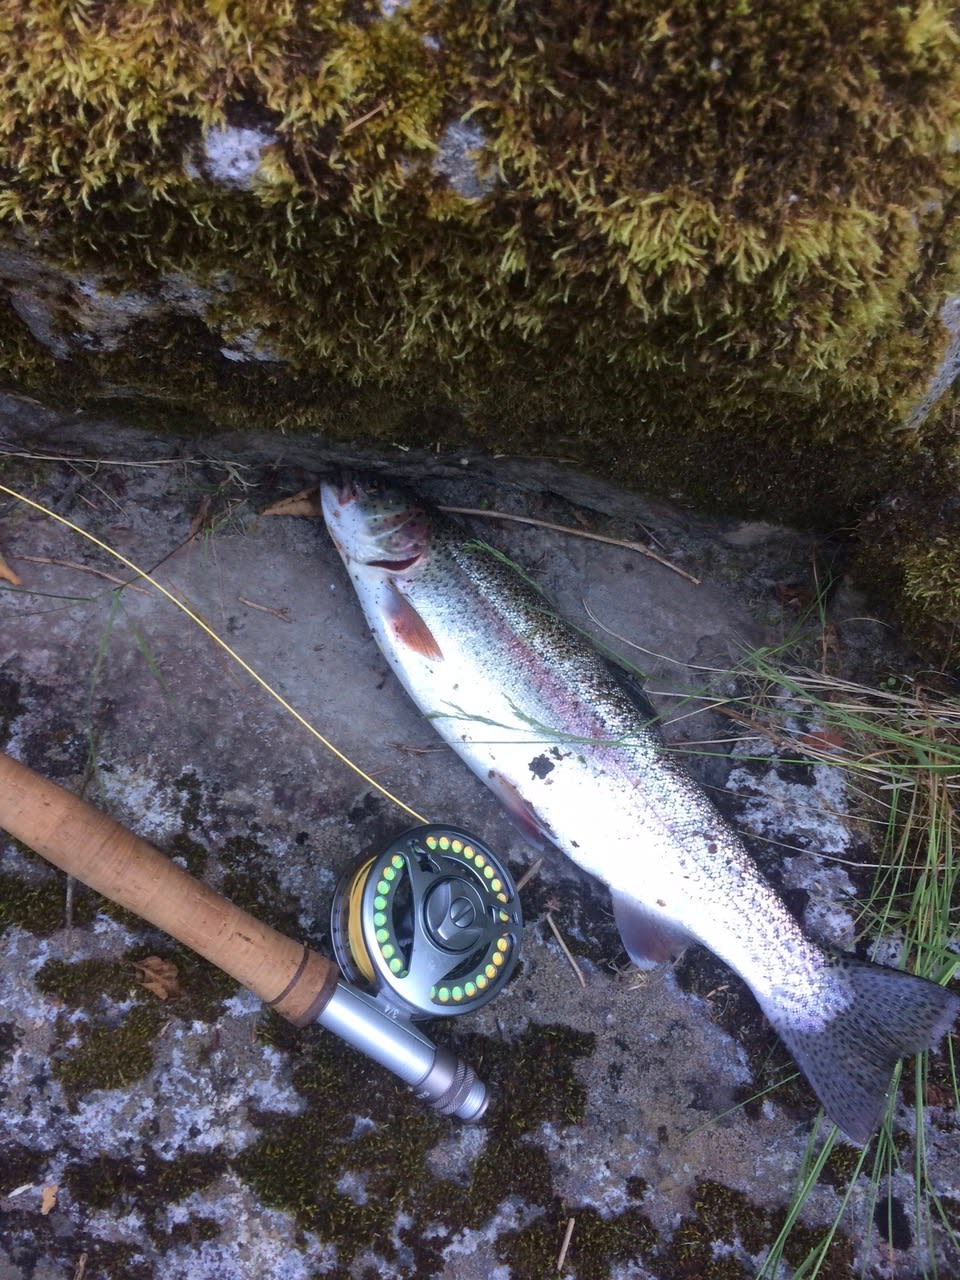 Fish in the river, Rainbow trout, Steelhead and Salmon